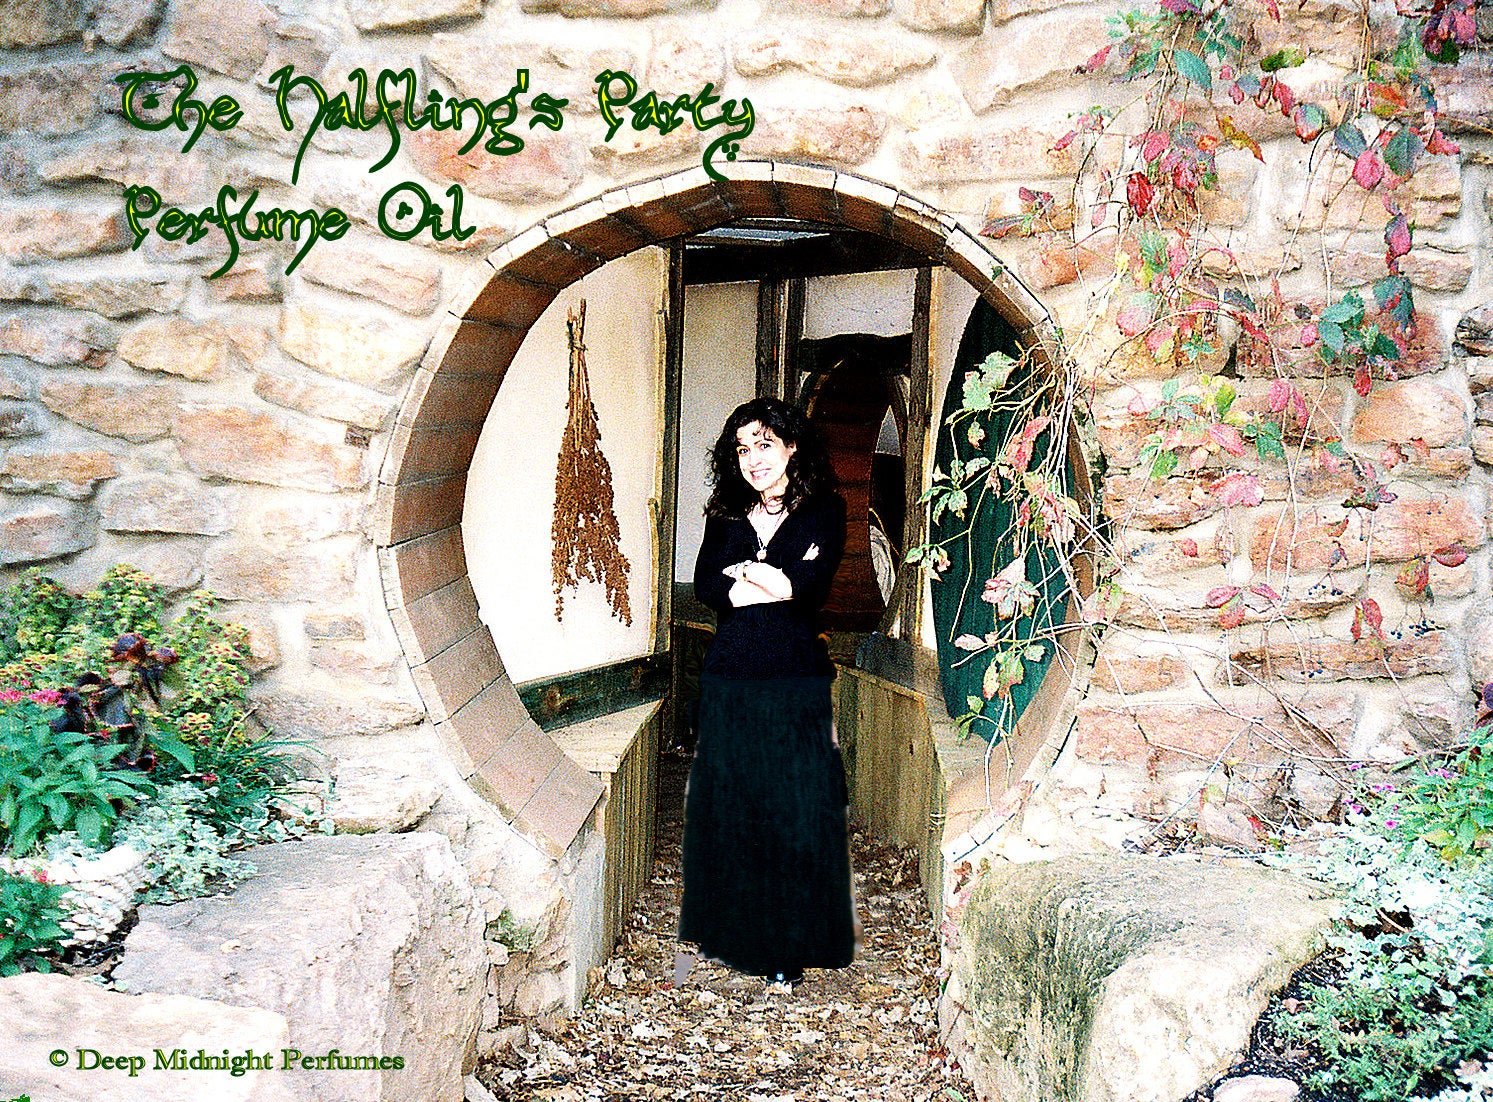 The Halfling's Party Perfume Oil - Inspired by The Hobbit - Buttered Bread, Caramel, Rum, Red Wine, Wood, Tobacco Leaf